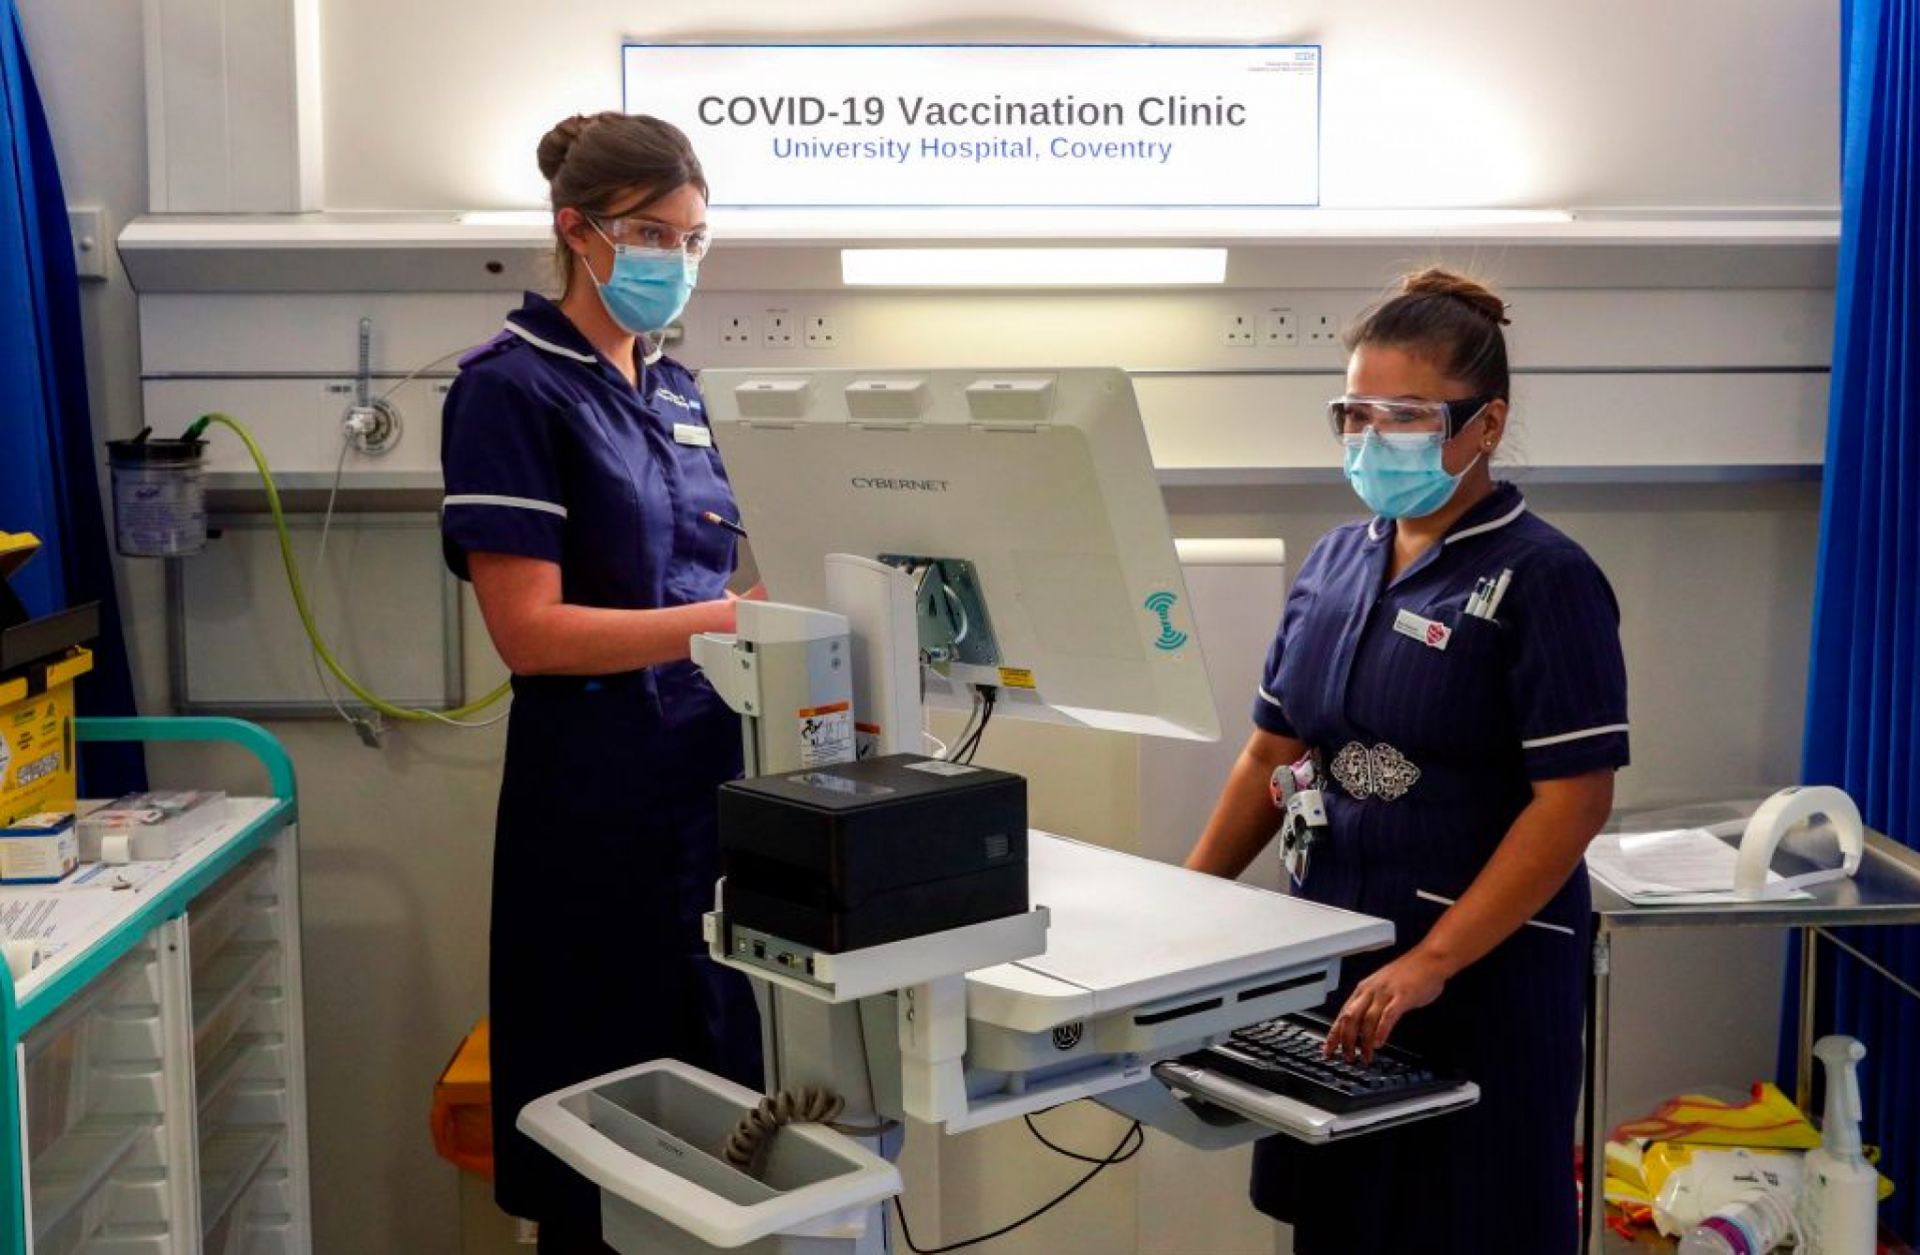 Nurses train in the COVID-19 Vaccination Clinic at the University Hospital in Coventry, England, on Dec. 4, 2020, prior to the beginning of the actual vaccination campaign.